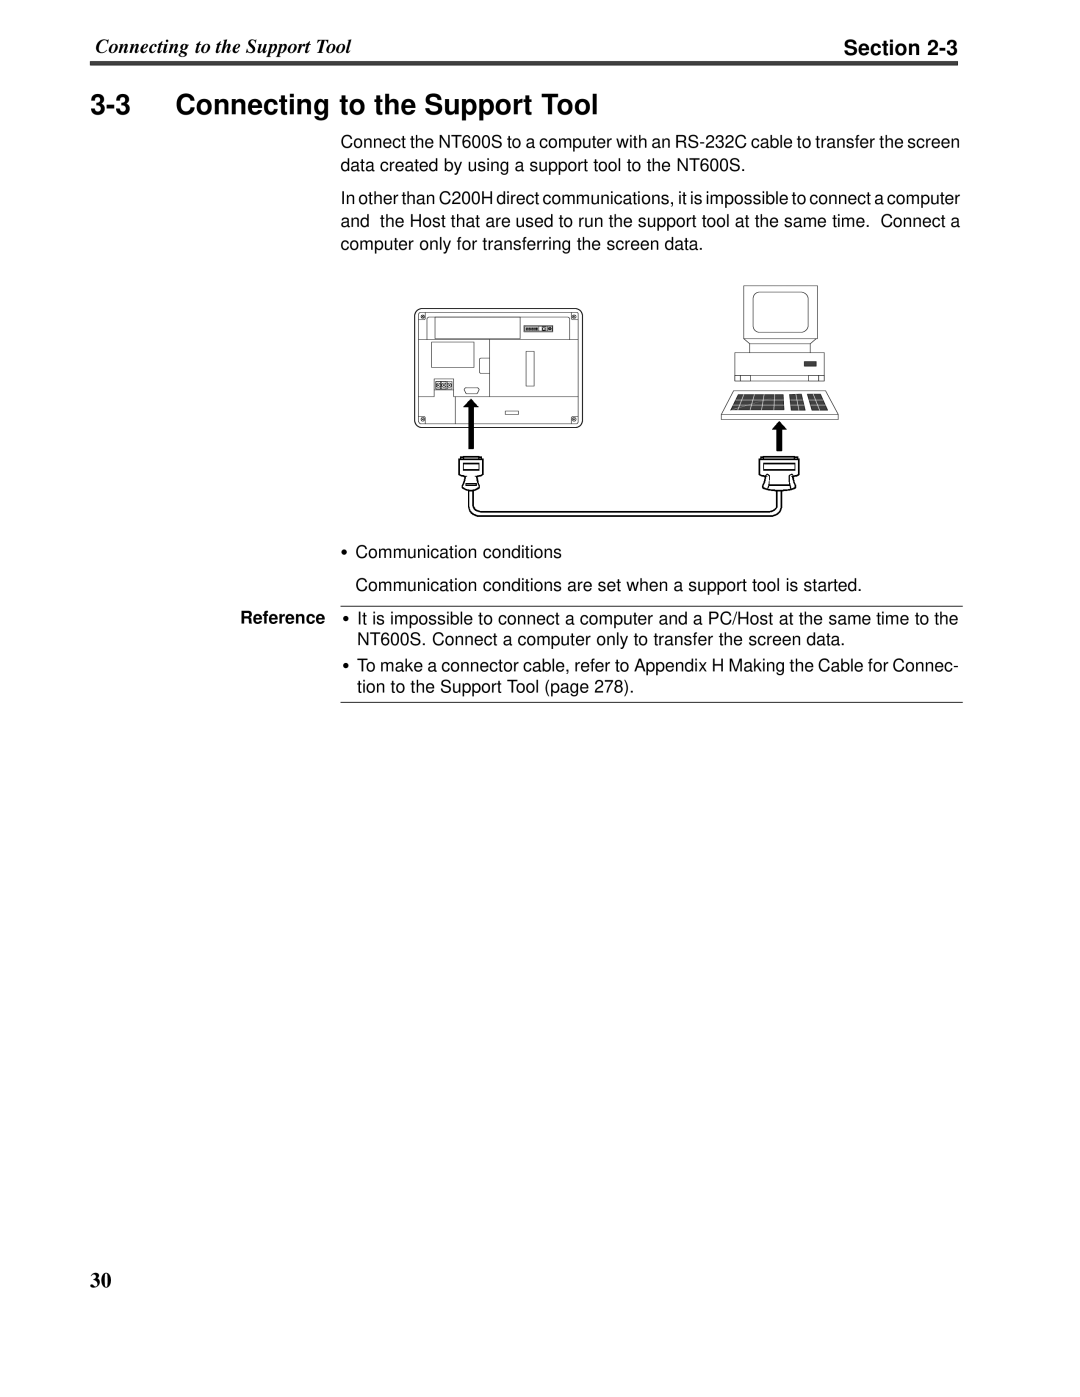 Omron V022-E3-1 operation manual 3-3Connecting to the Support Tool, Section 